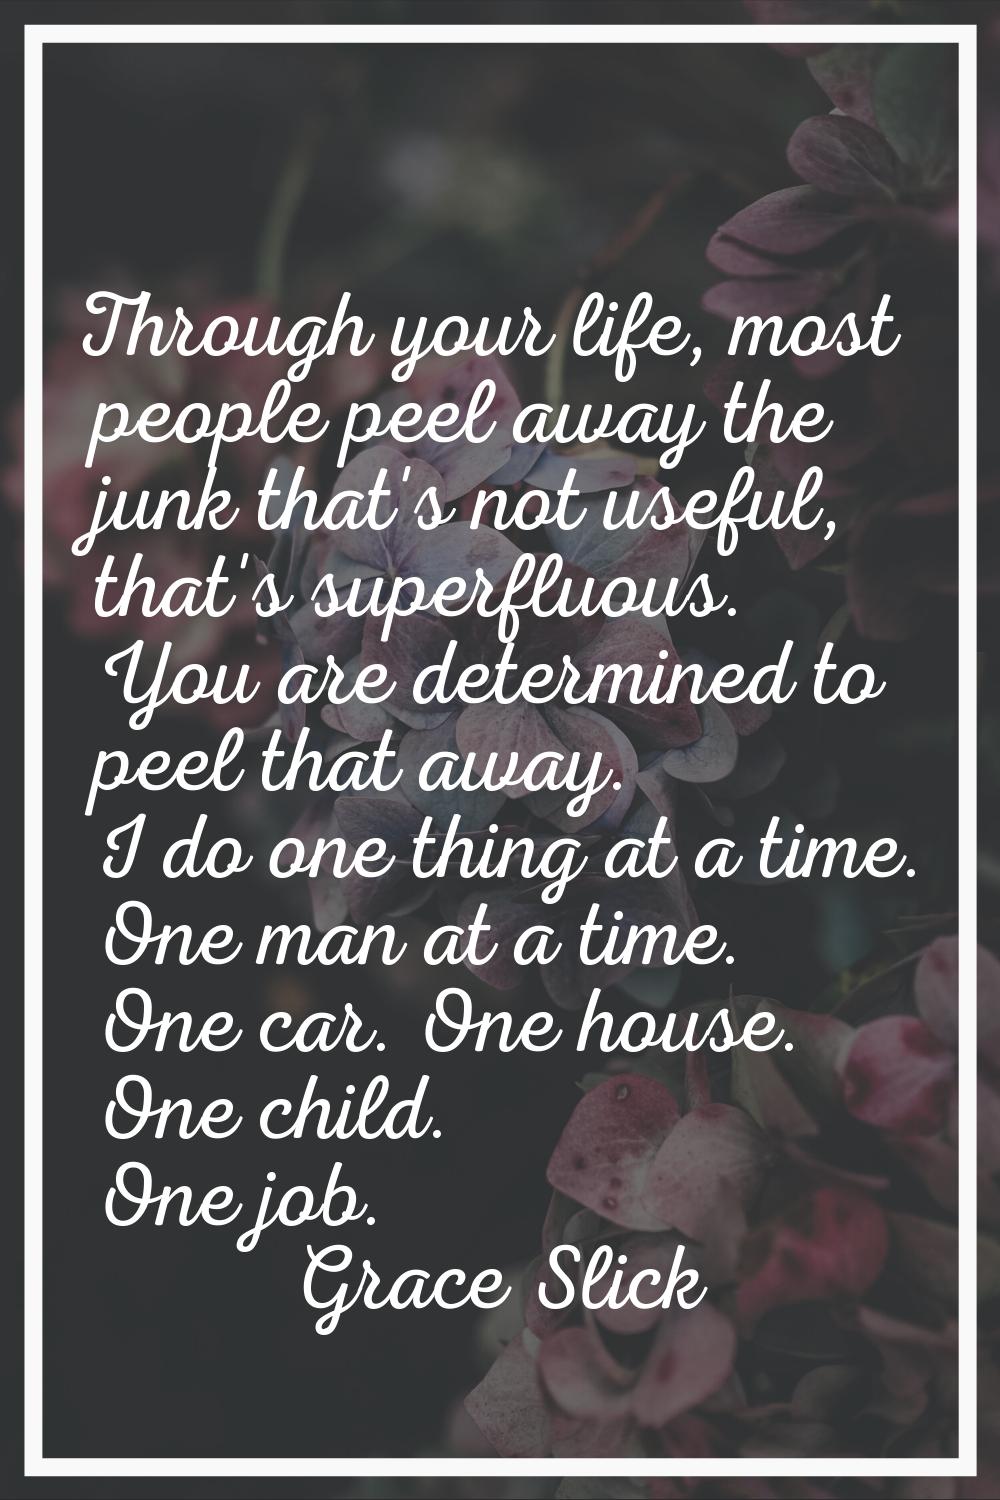 Through your life, most people peel away the junk that's not useful, that's superfluous. You are de